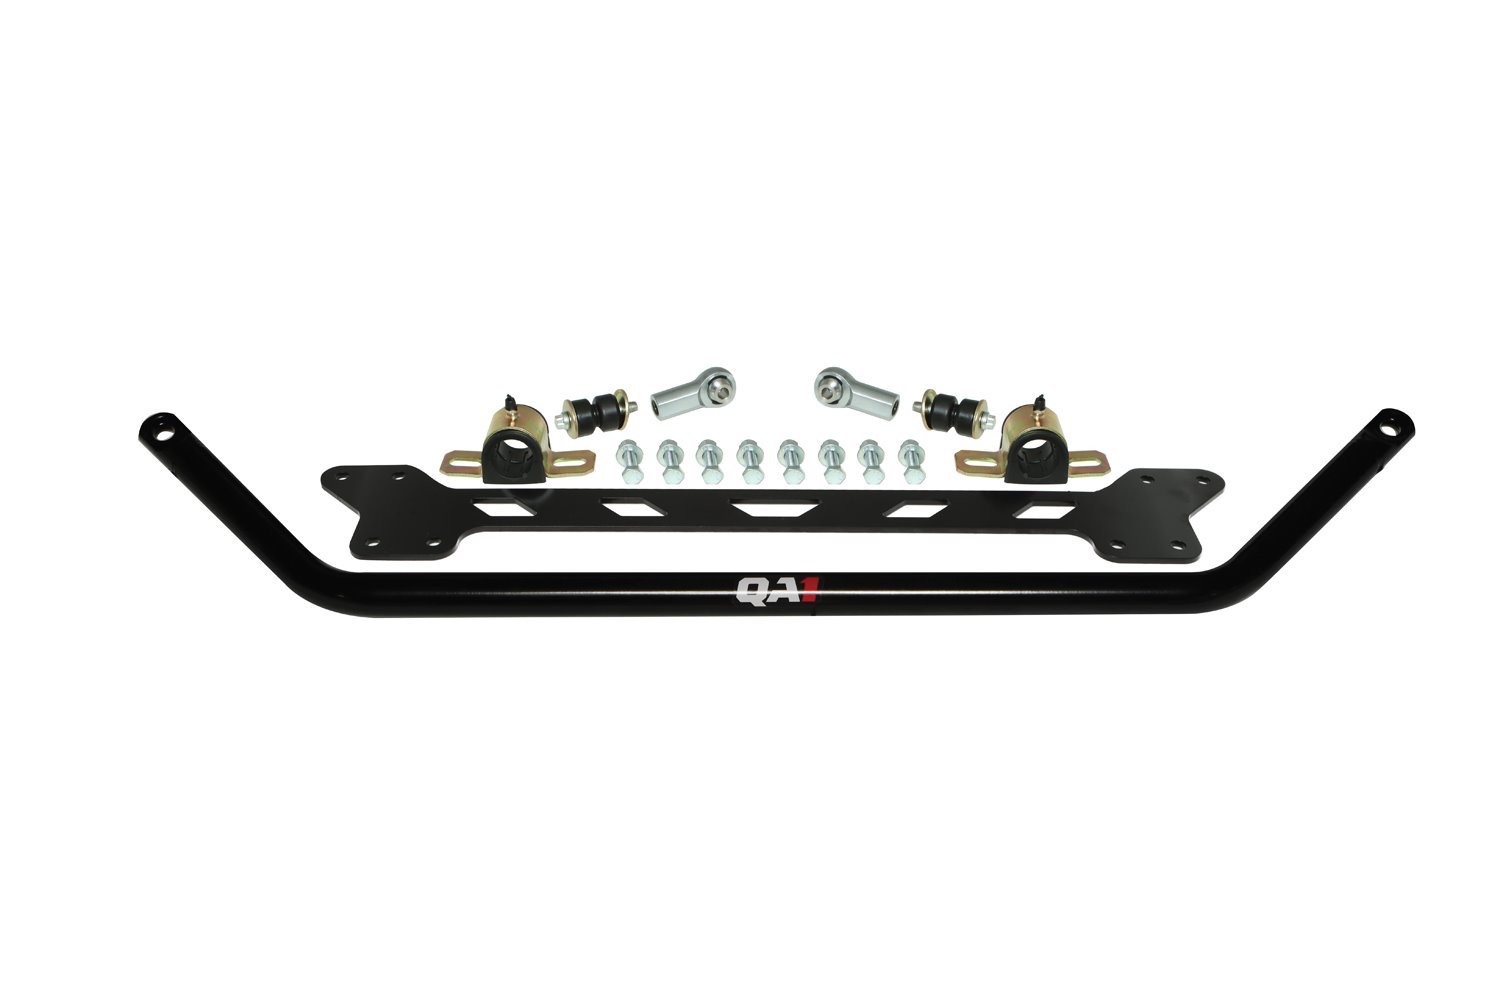 Front Sway Bar For 1965-1970 Chevrolet Biscayne, Impala